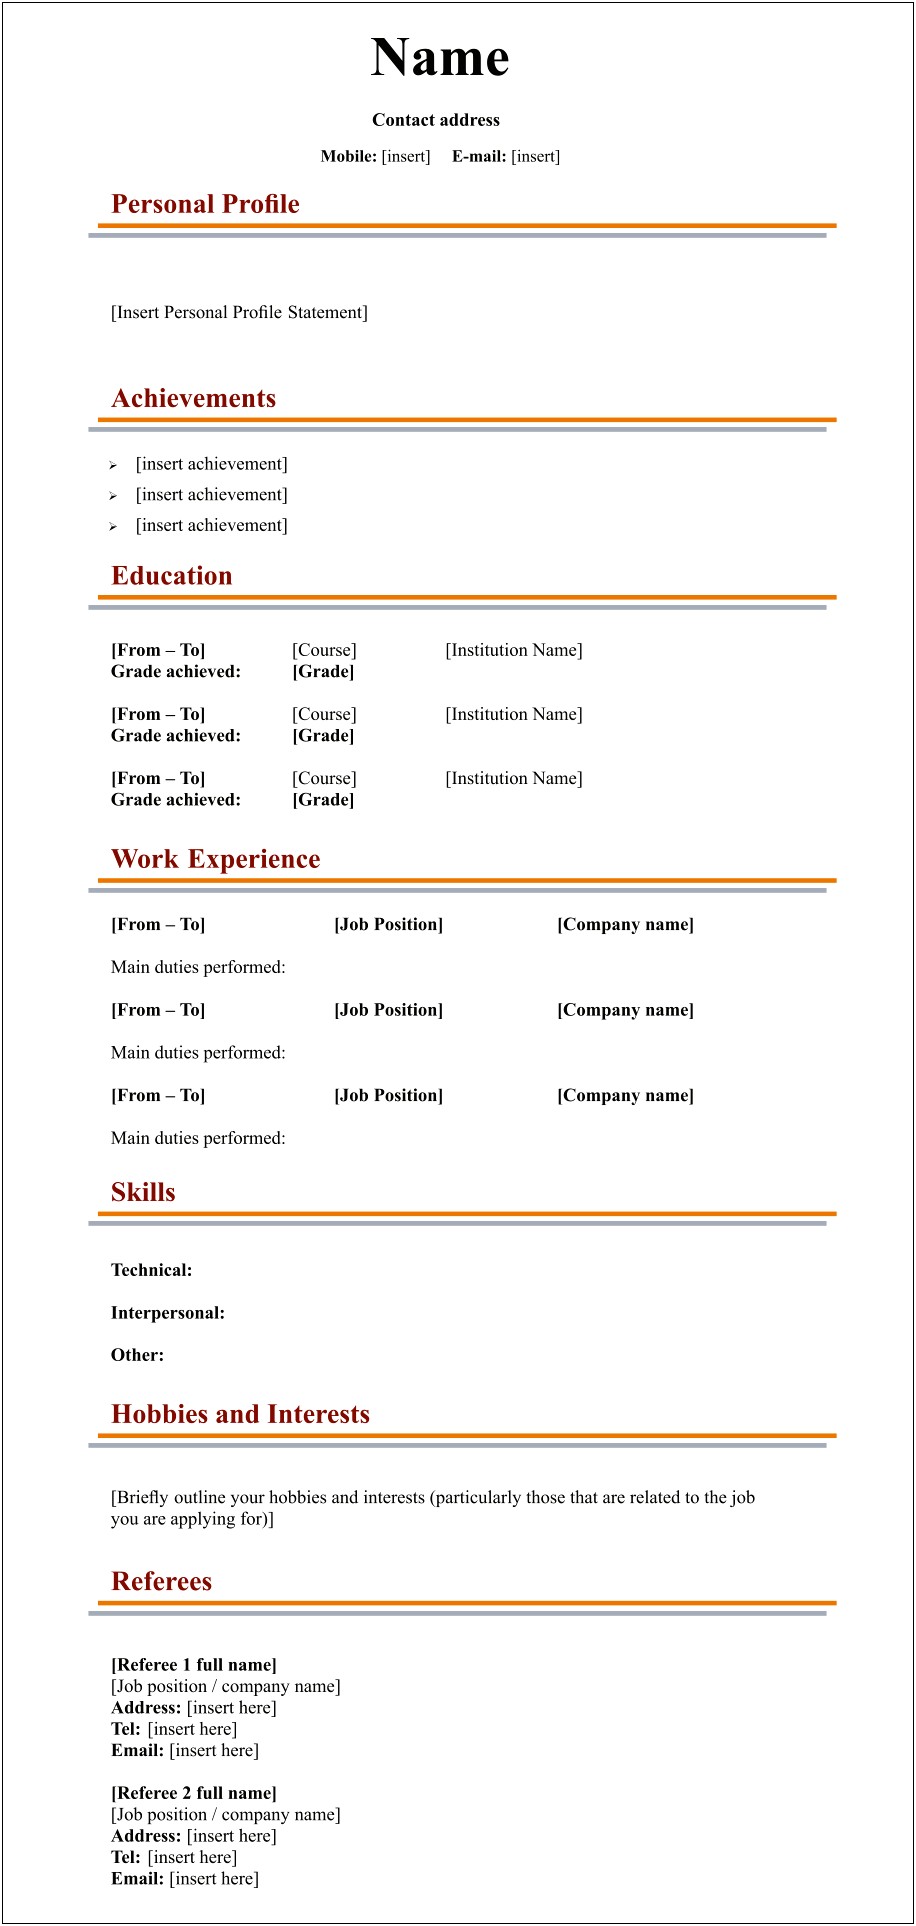 Resume Templates Fill In The Blanks Free